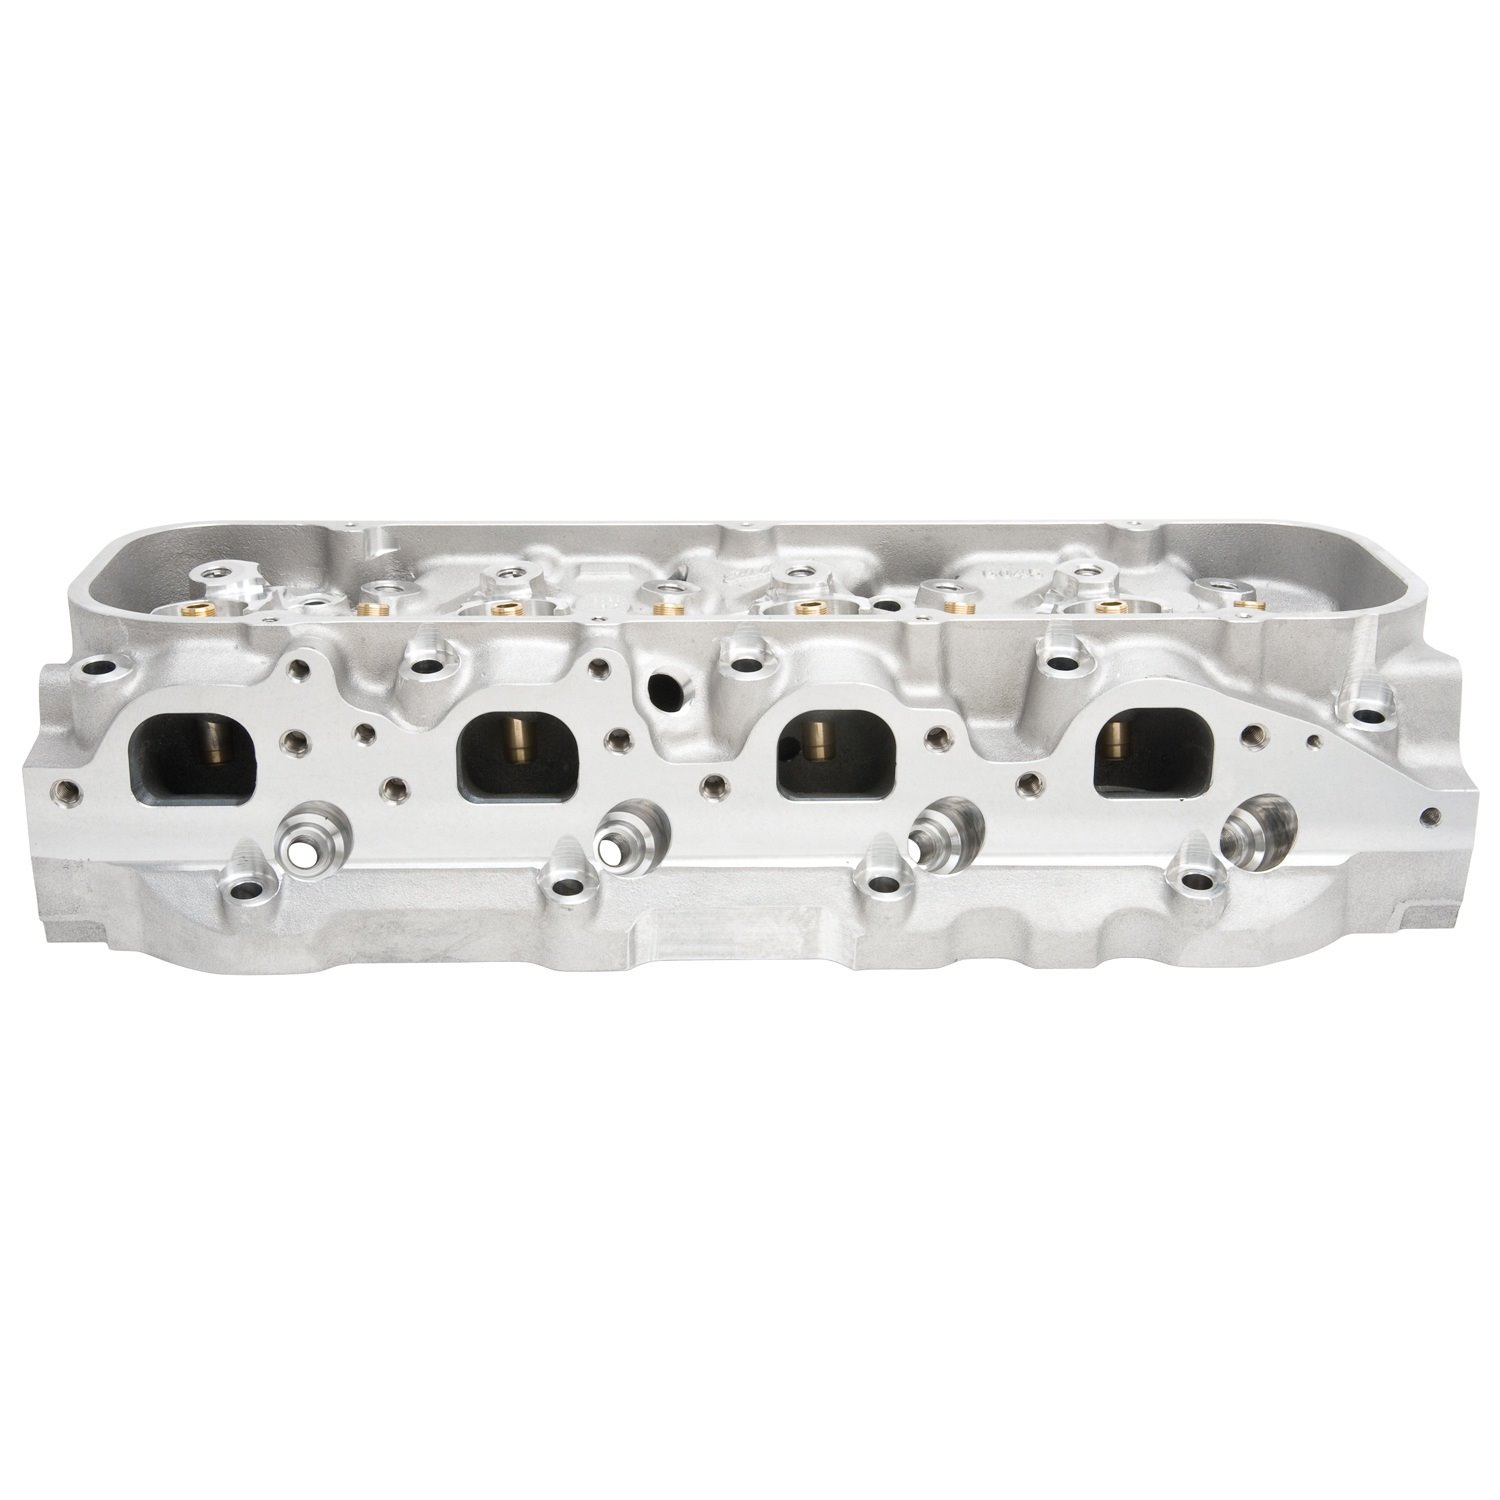 Performer High-Compression 454-O Oval Port Cylinder Head for Big Block Chevy